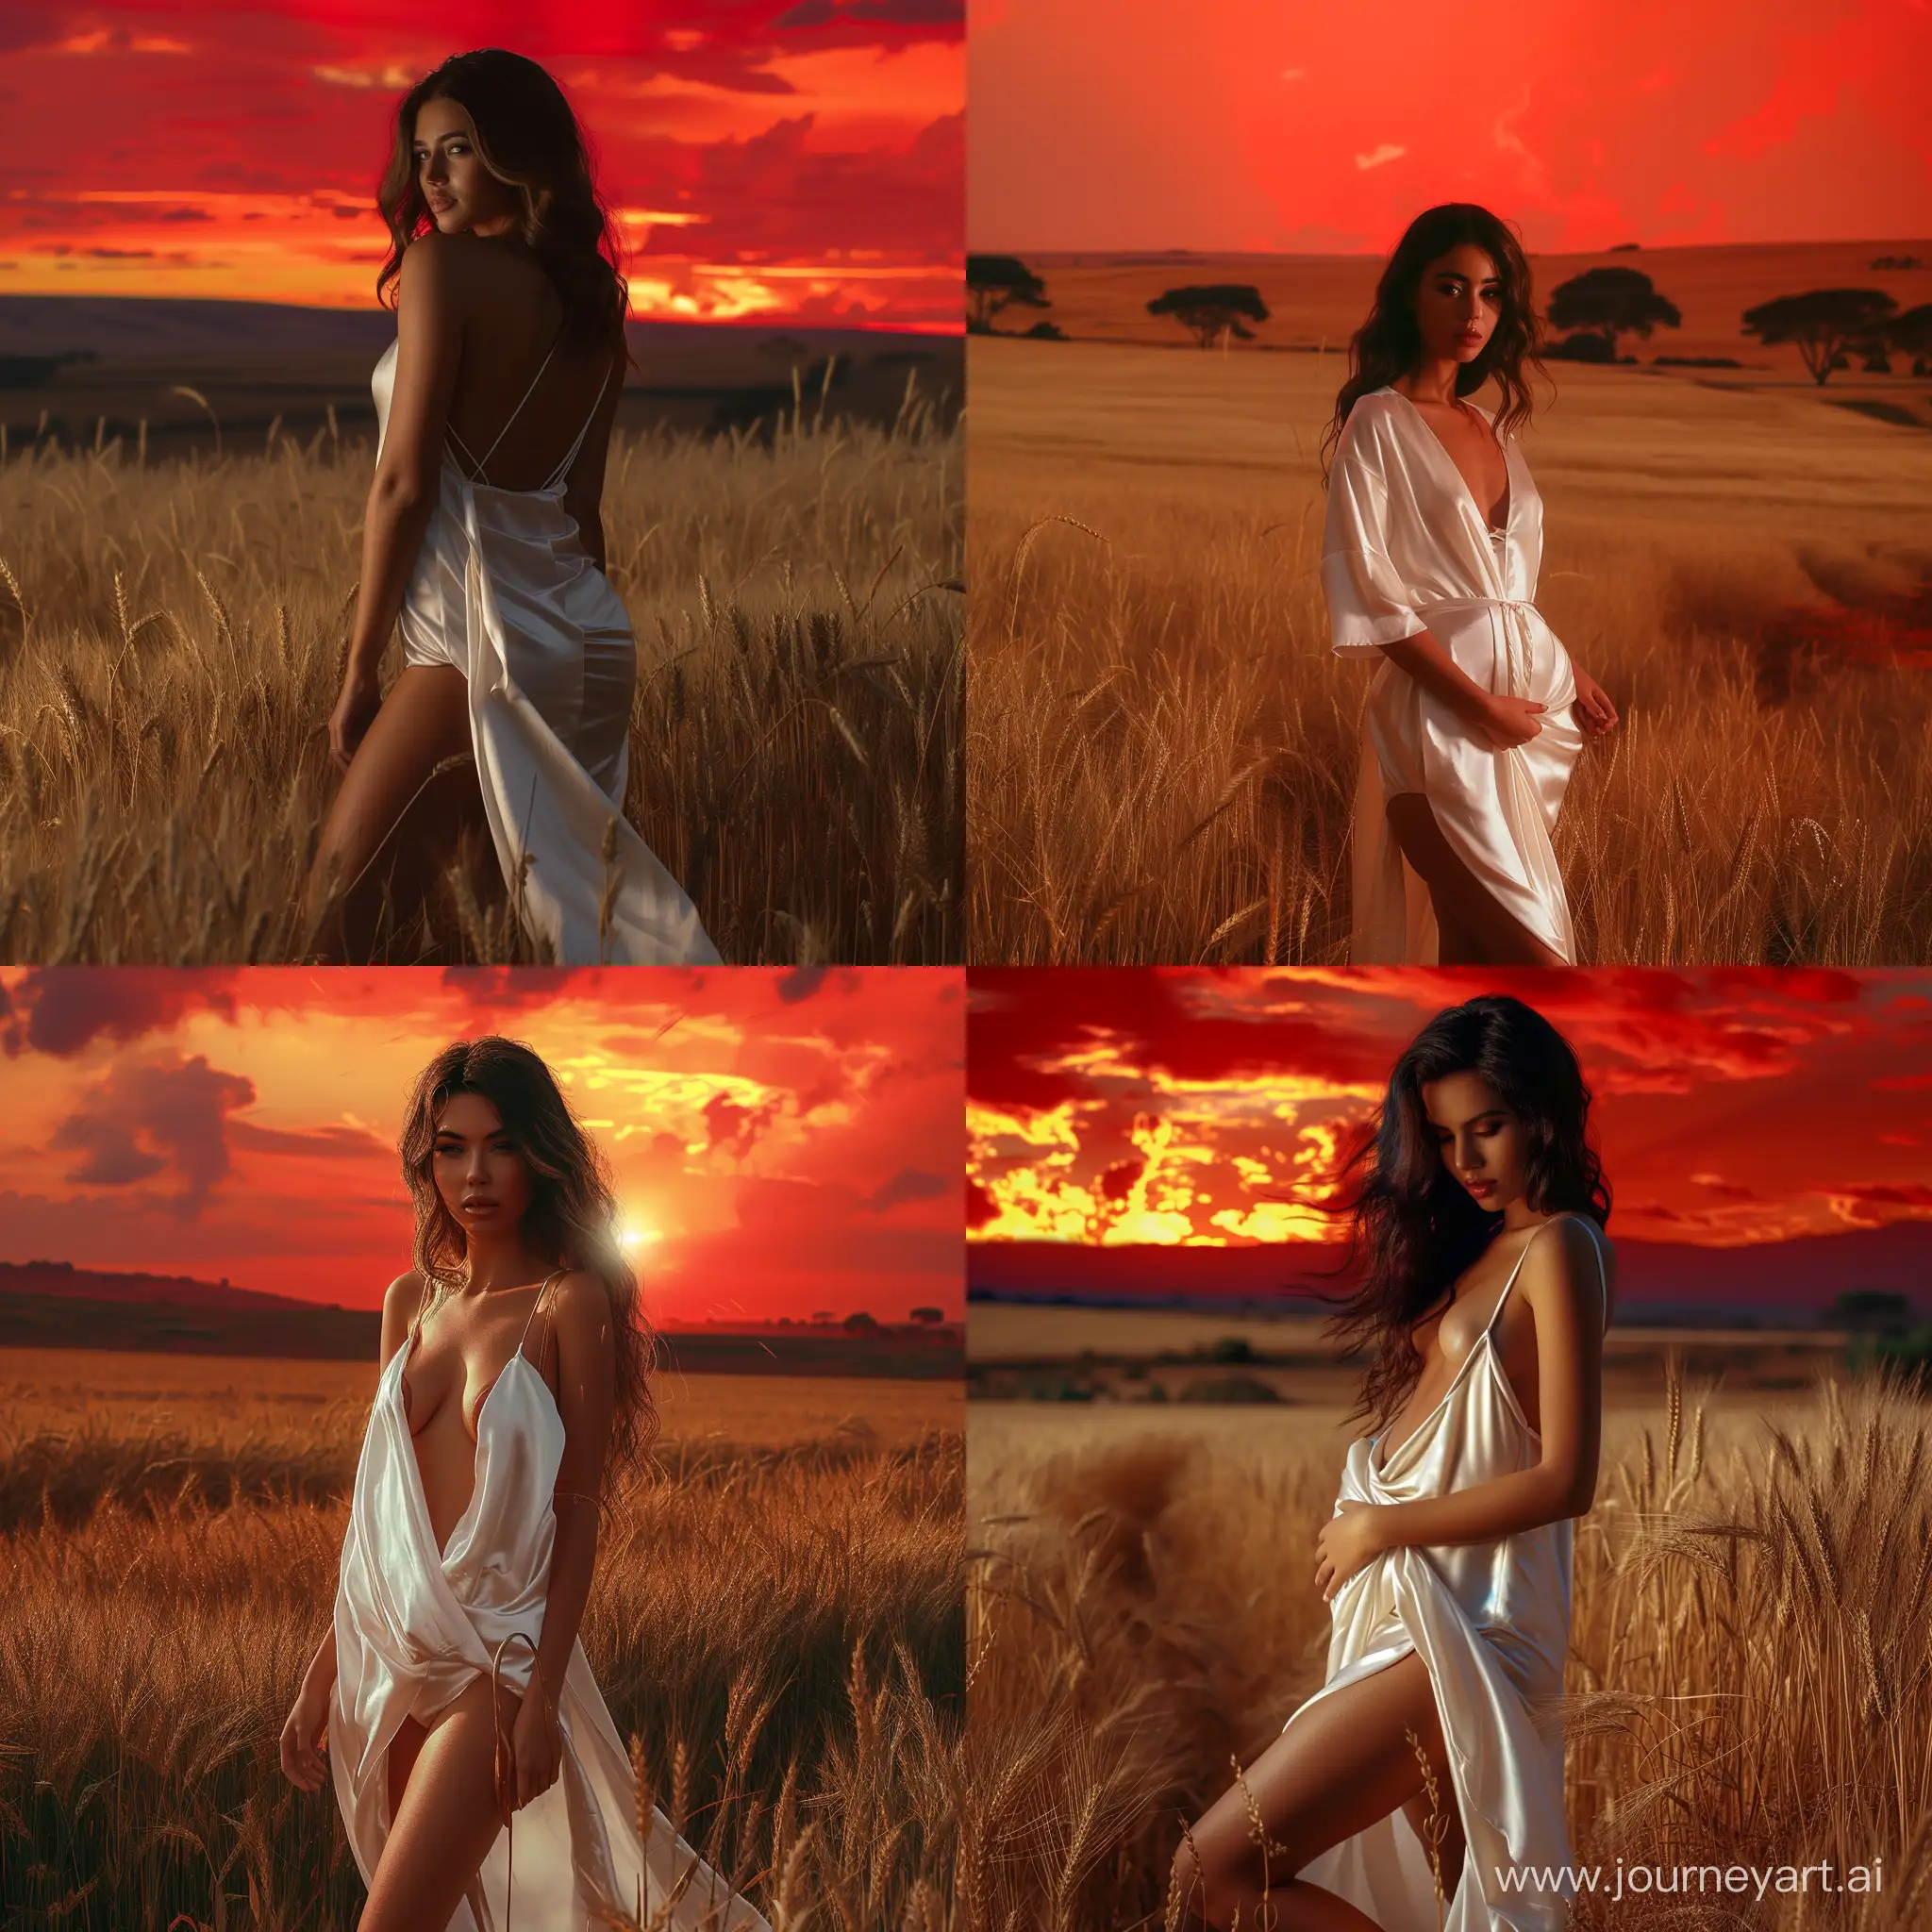 Hour glass physique, brunette model that doesn’t exist in real life, standing i a wheat field in a red African sun set, wearing a white silk night gown